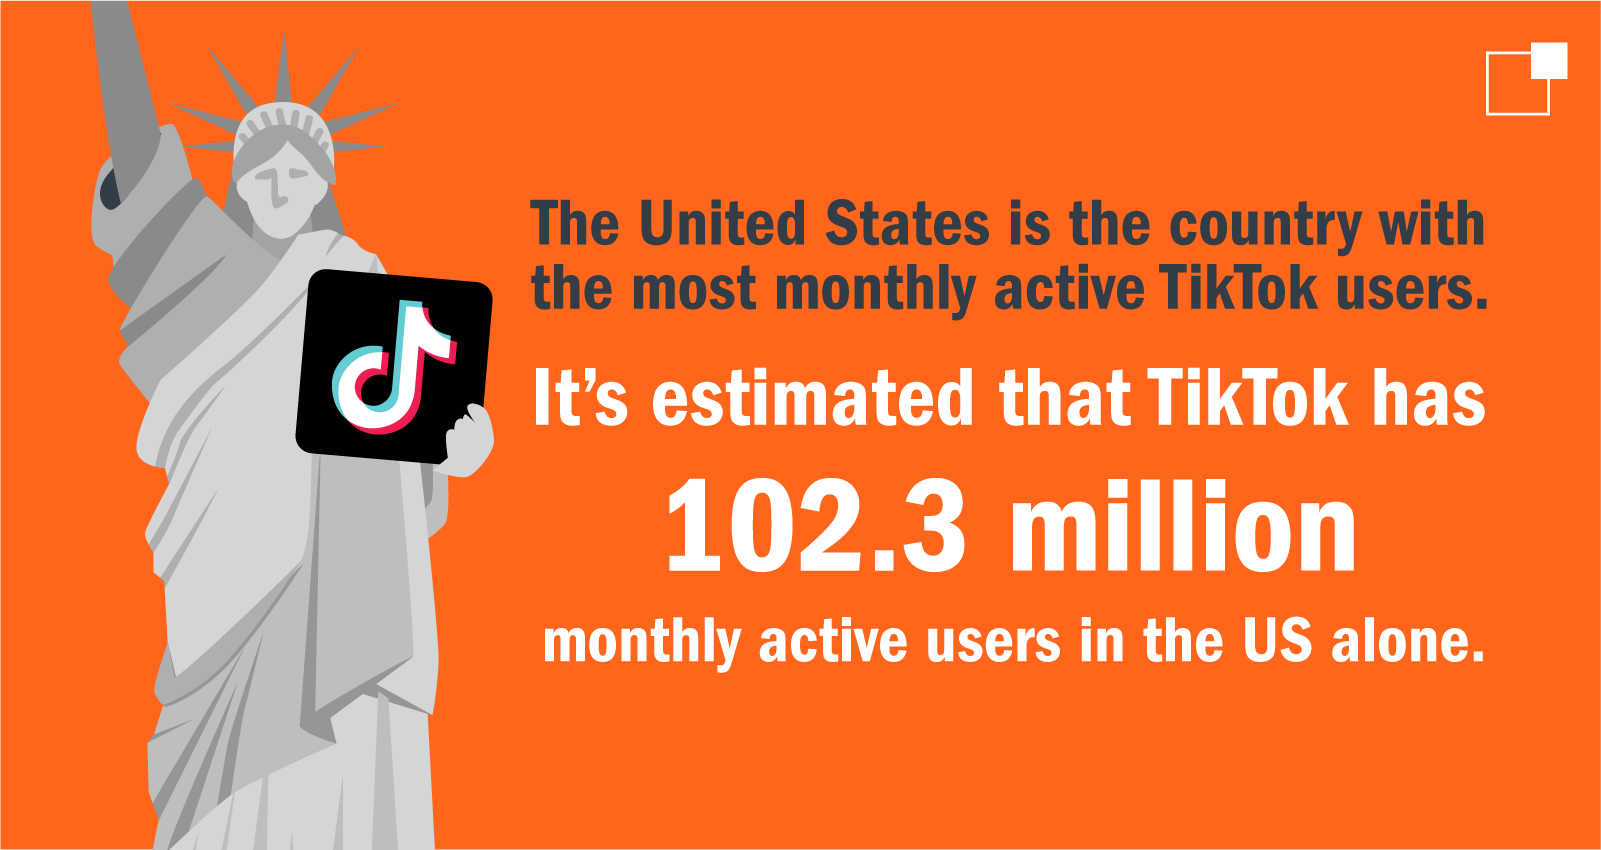 'The United States is the country with the most monthly active TikTok users. It's estimated that TikTok has 102.3 million monthly active users in the US alone." Statistic accompanied by the Statue of Liberty.